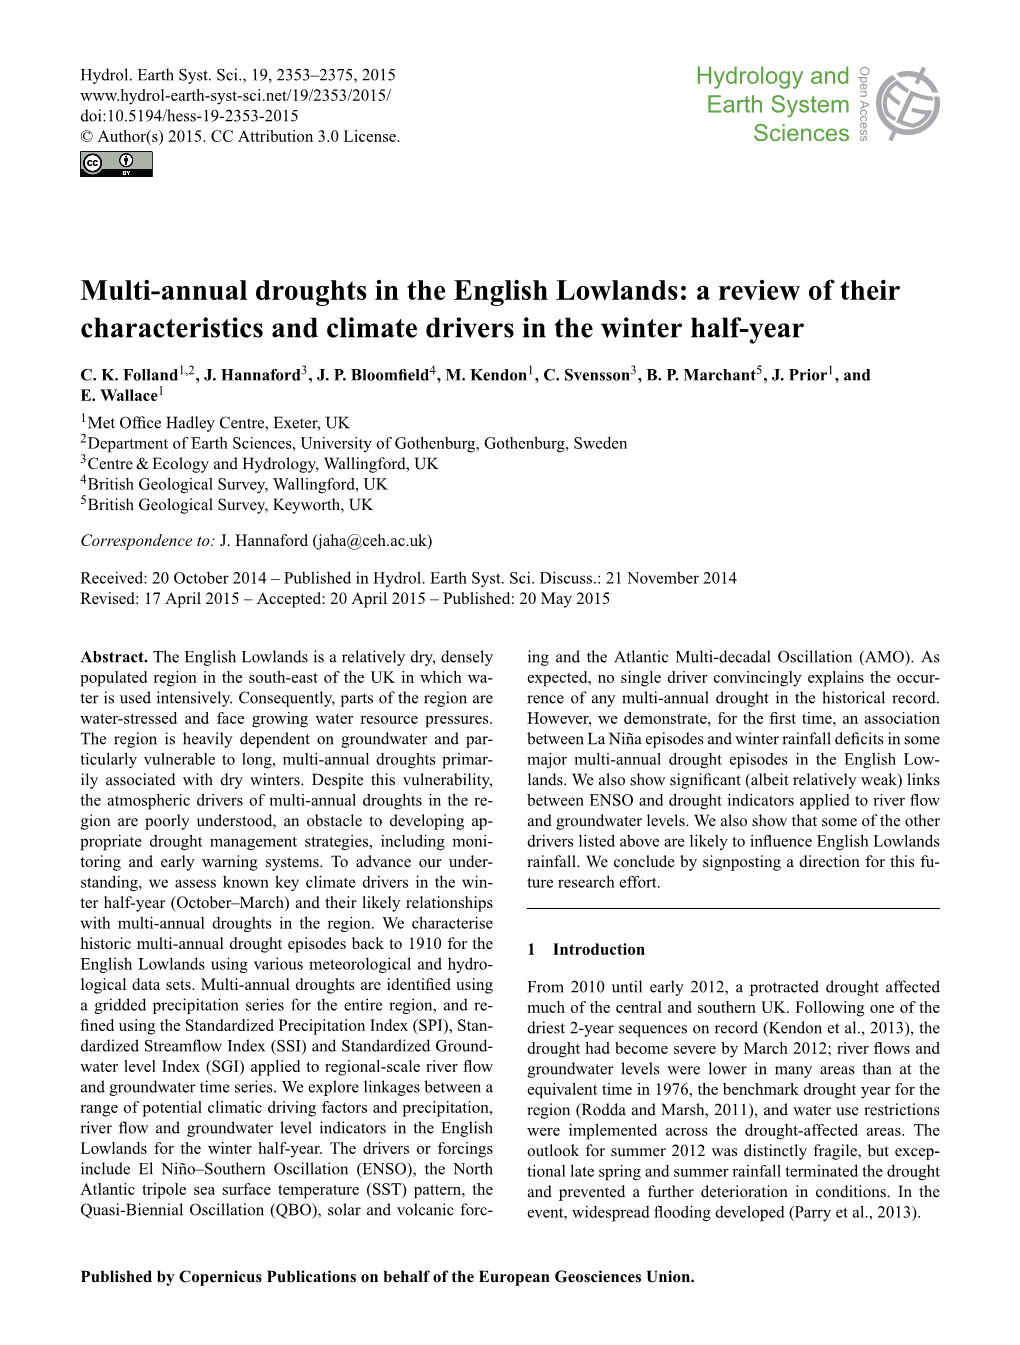 Multi-Annual Droughts in the English Lowlands: a Review of Their Characteristics and Climate Drivers in the Winter Half-Year